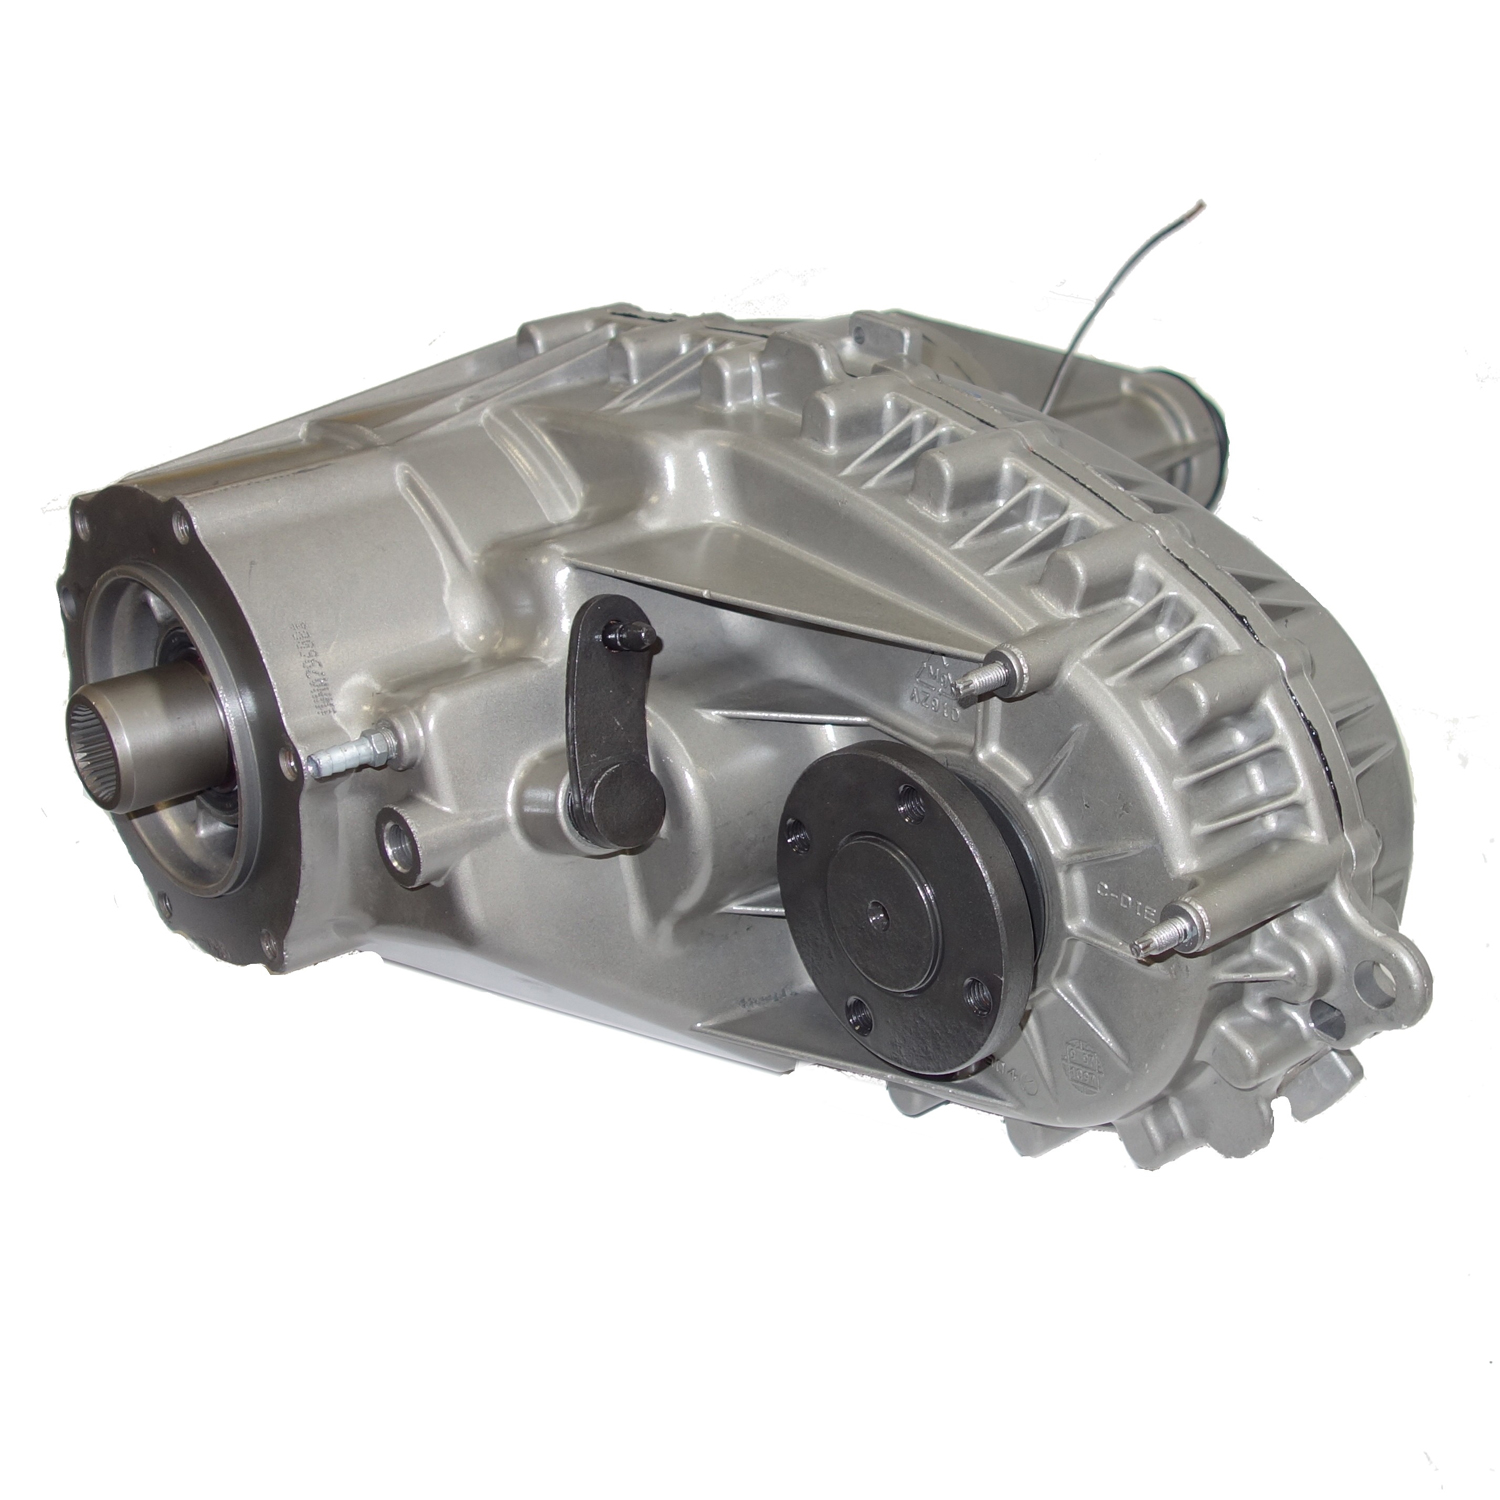 Remanufactured BW4406 Transfer Case for Ford 97-98